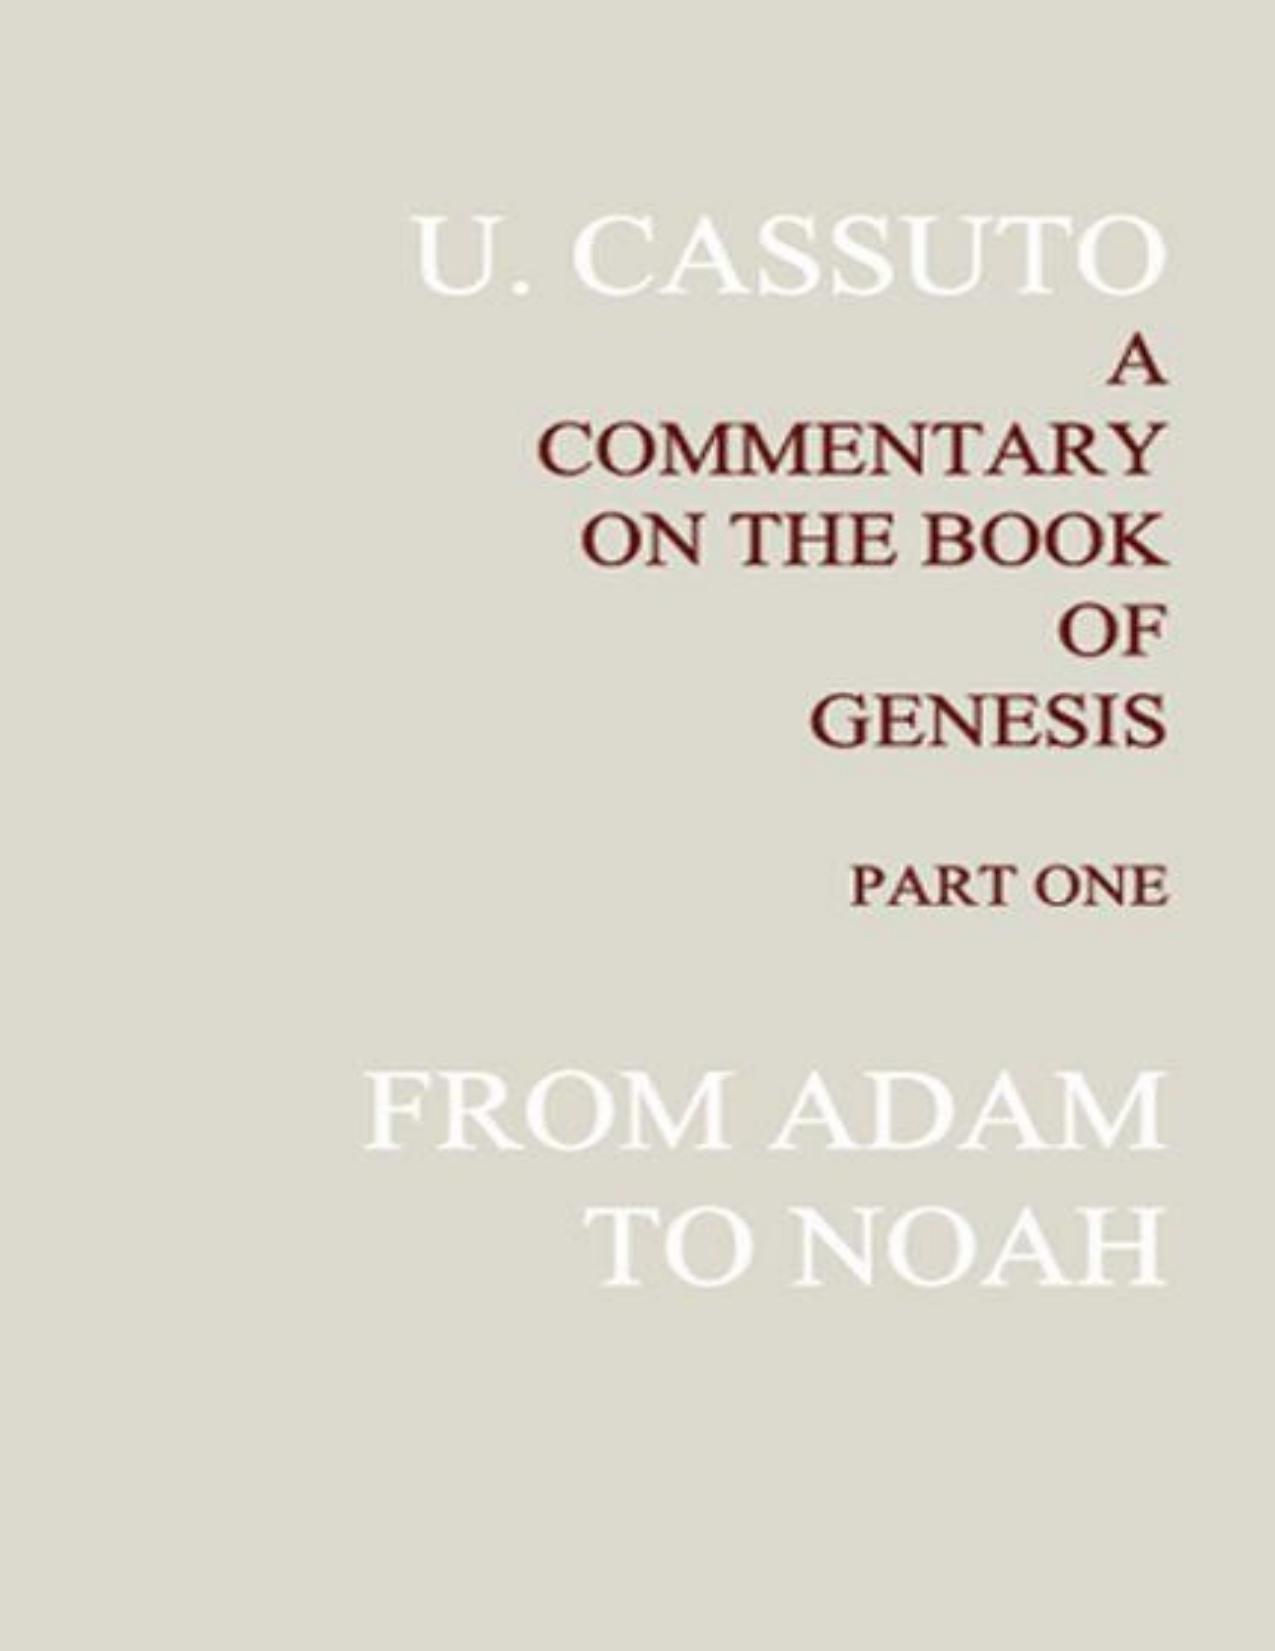 A Commentary on the Book of Genesis, Part 1: from Adam to Noah - PDFDrive.com